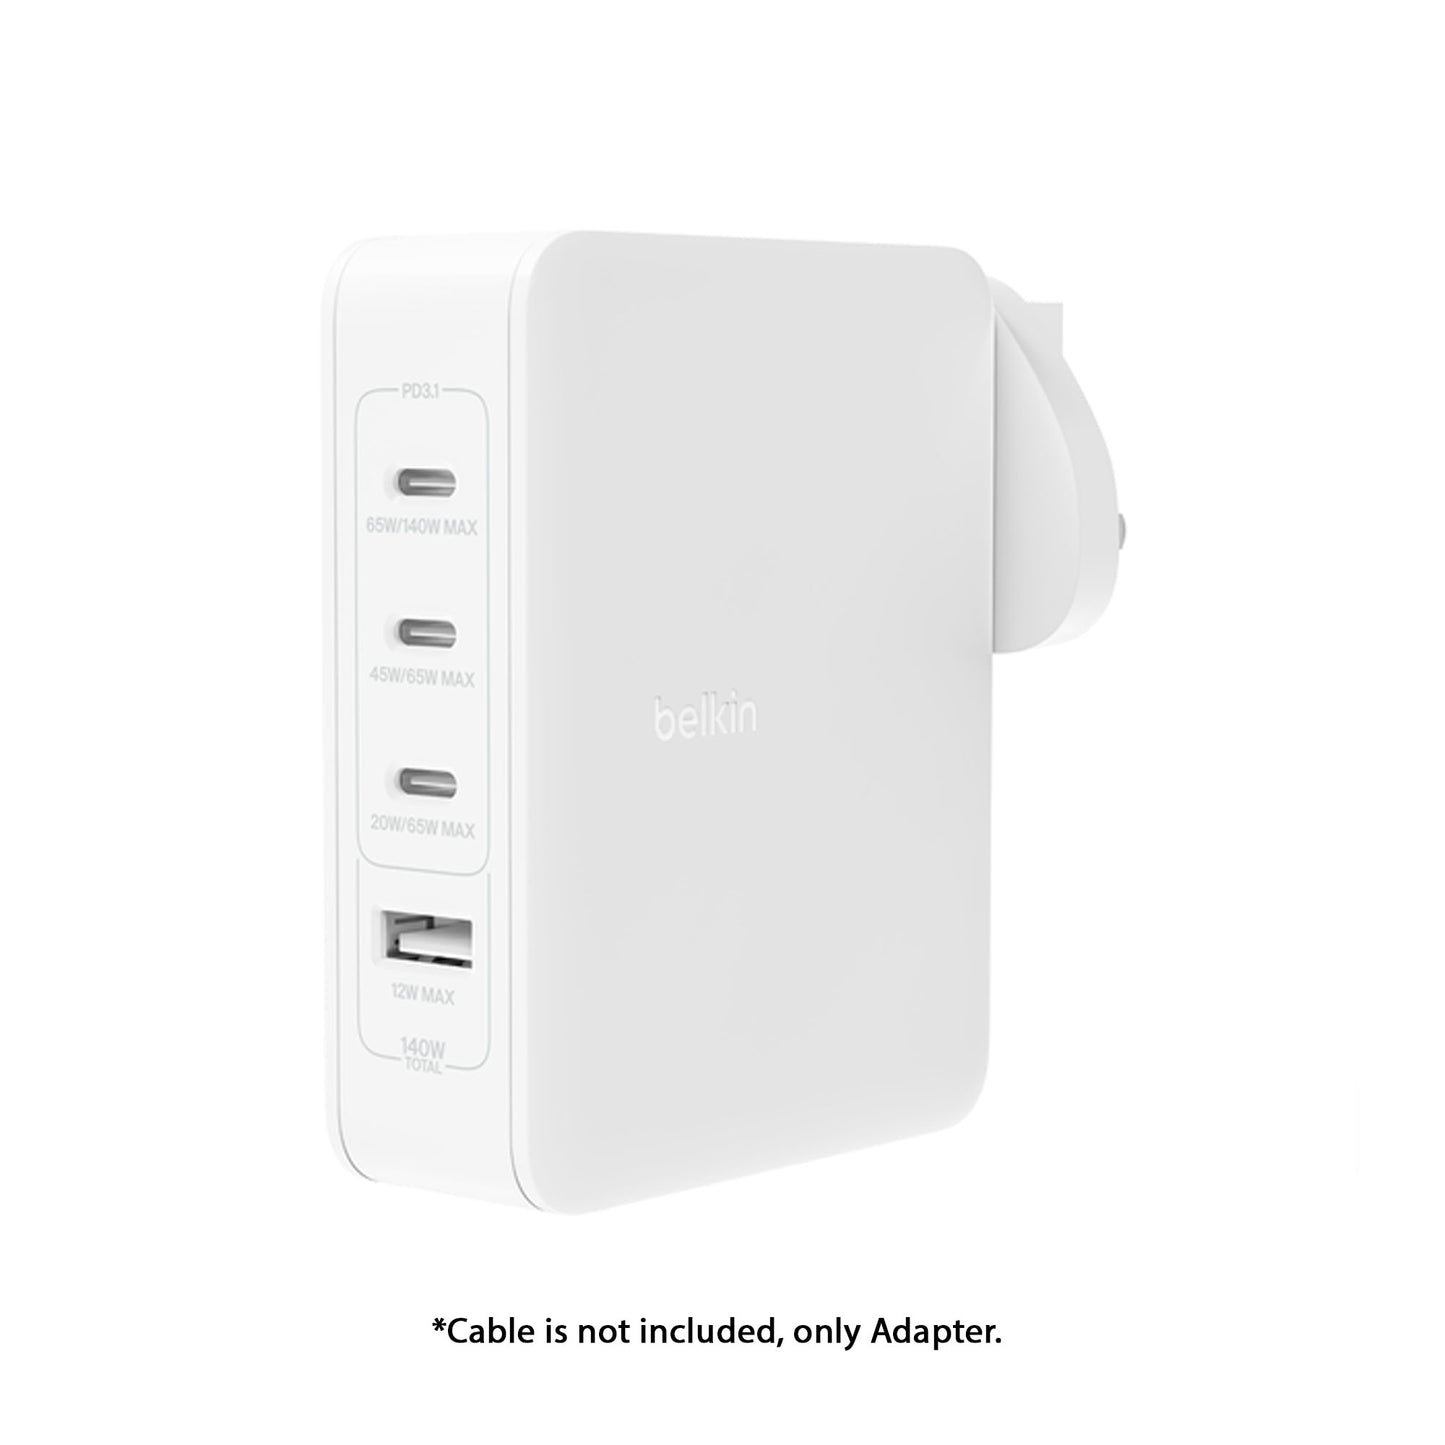 [ONLINE EXCLUSIVE] BELKIN BoostCharge Pro 140W 4-Port GaN PD  Fast Charging Wall Charge